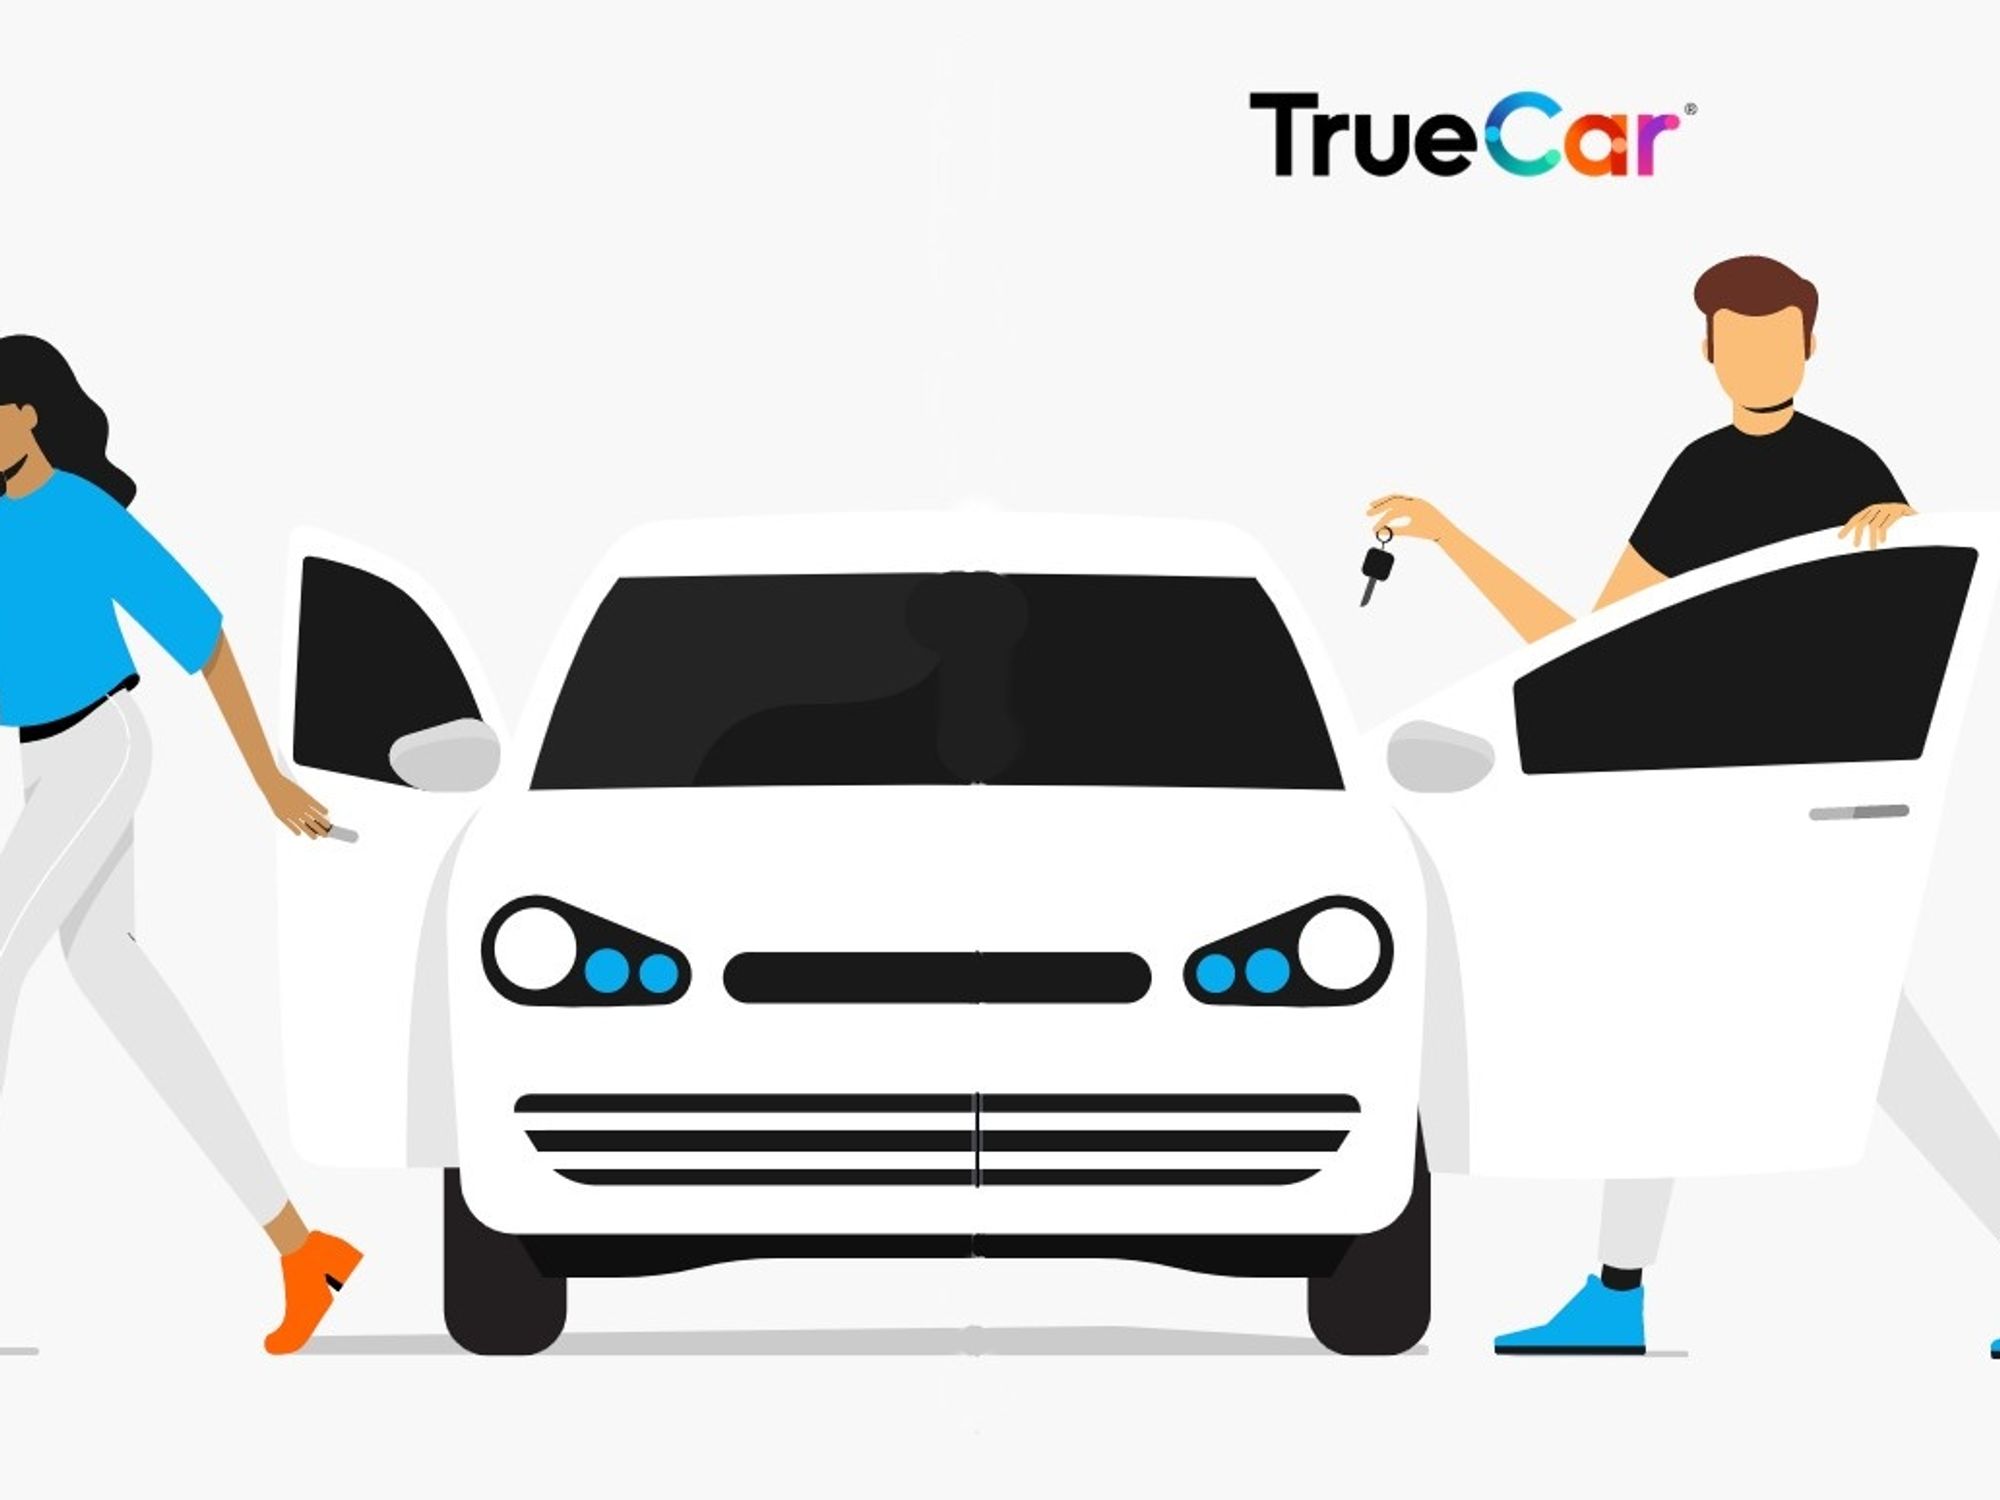 TrueCar Could be Acquired in the Next Month, Says Analyst